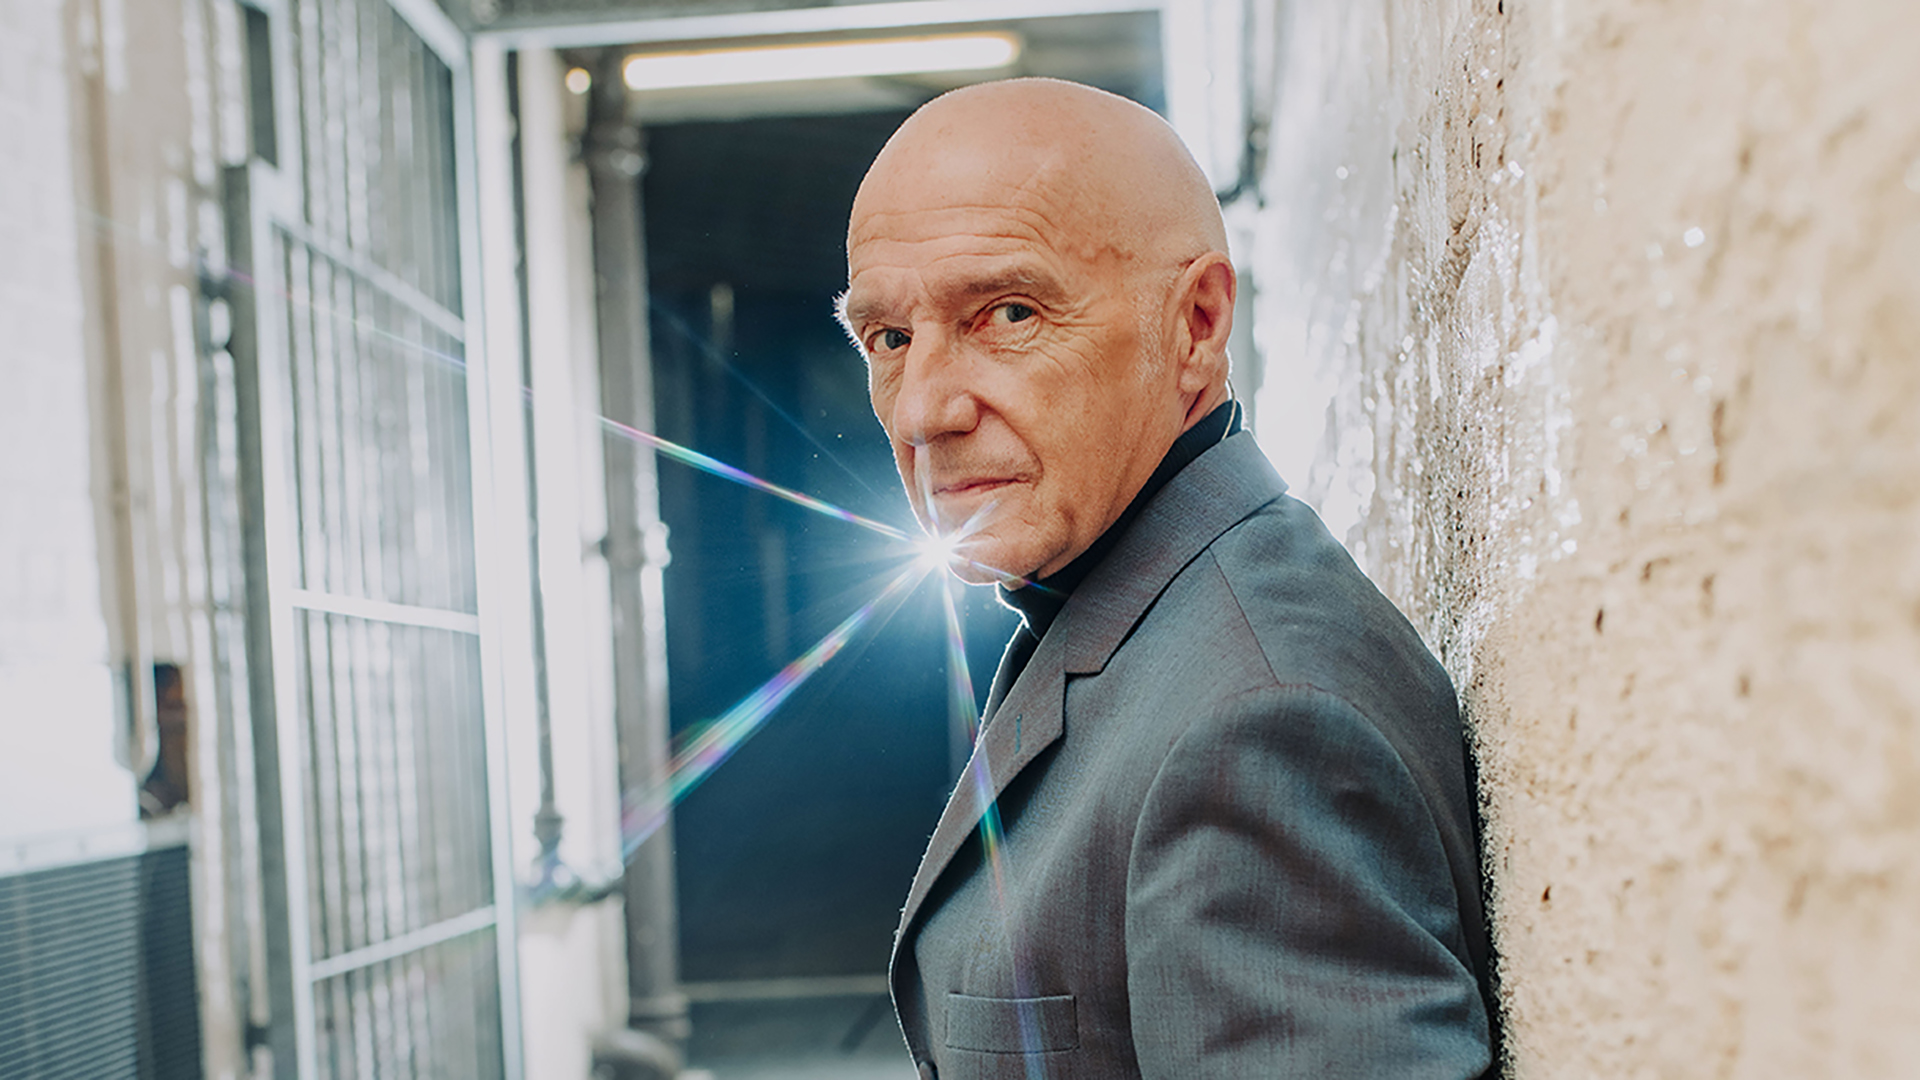 Midge Ure has opened up about the impact of his alcoholism